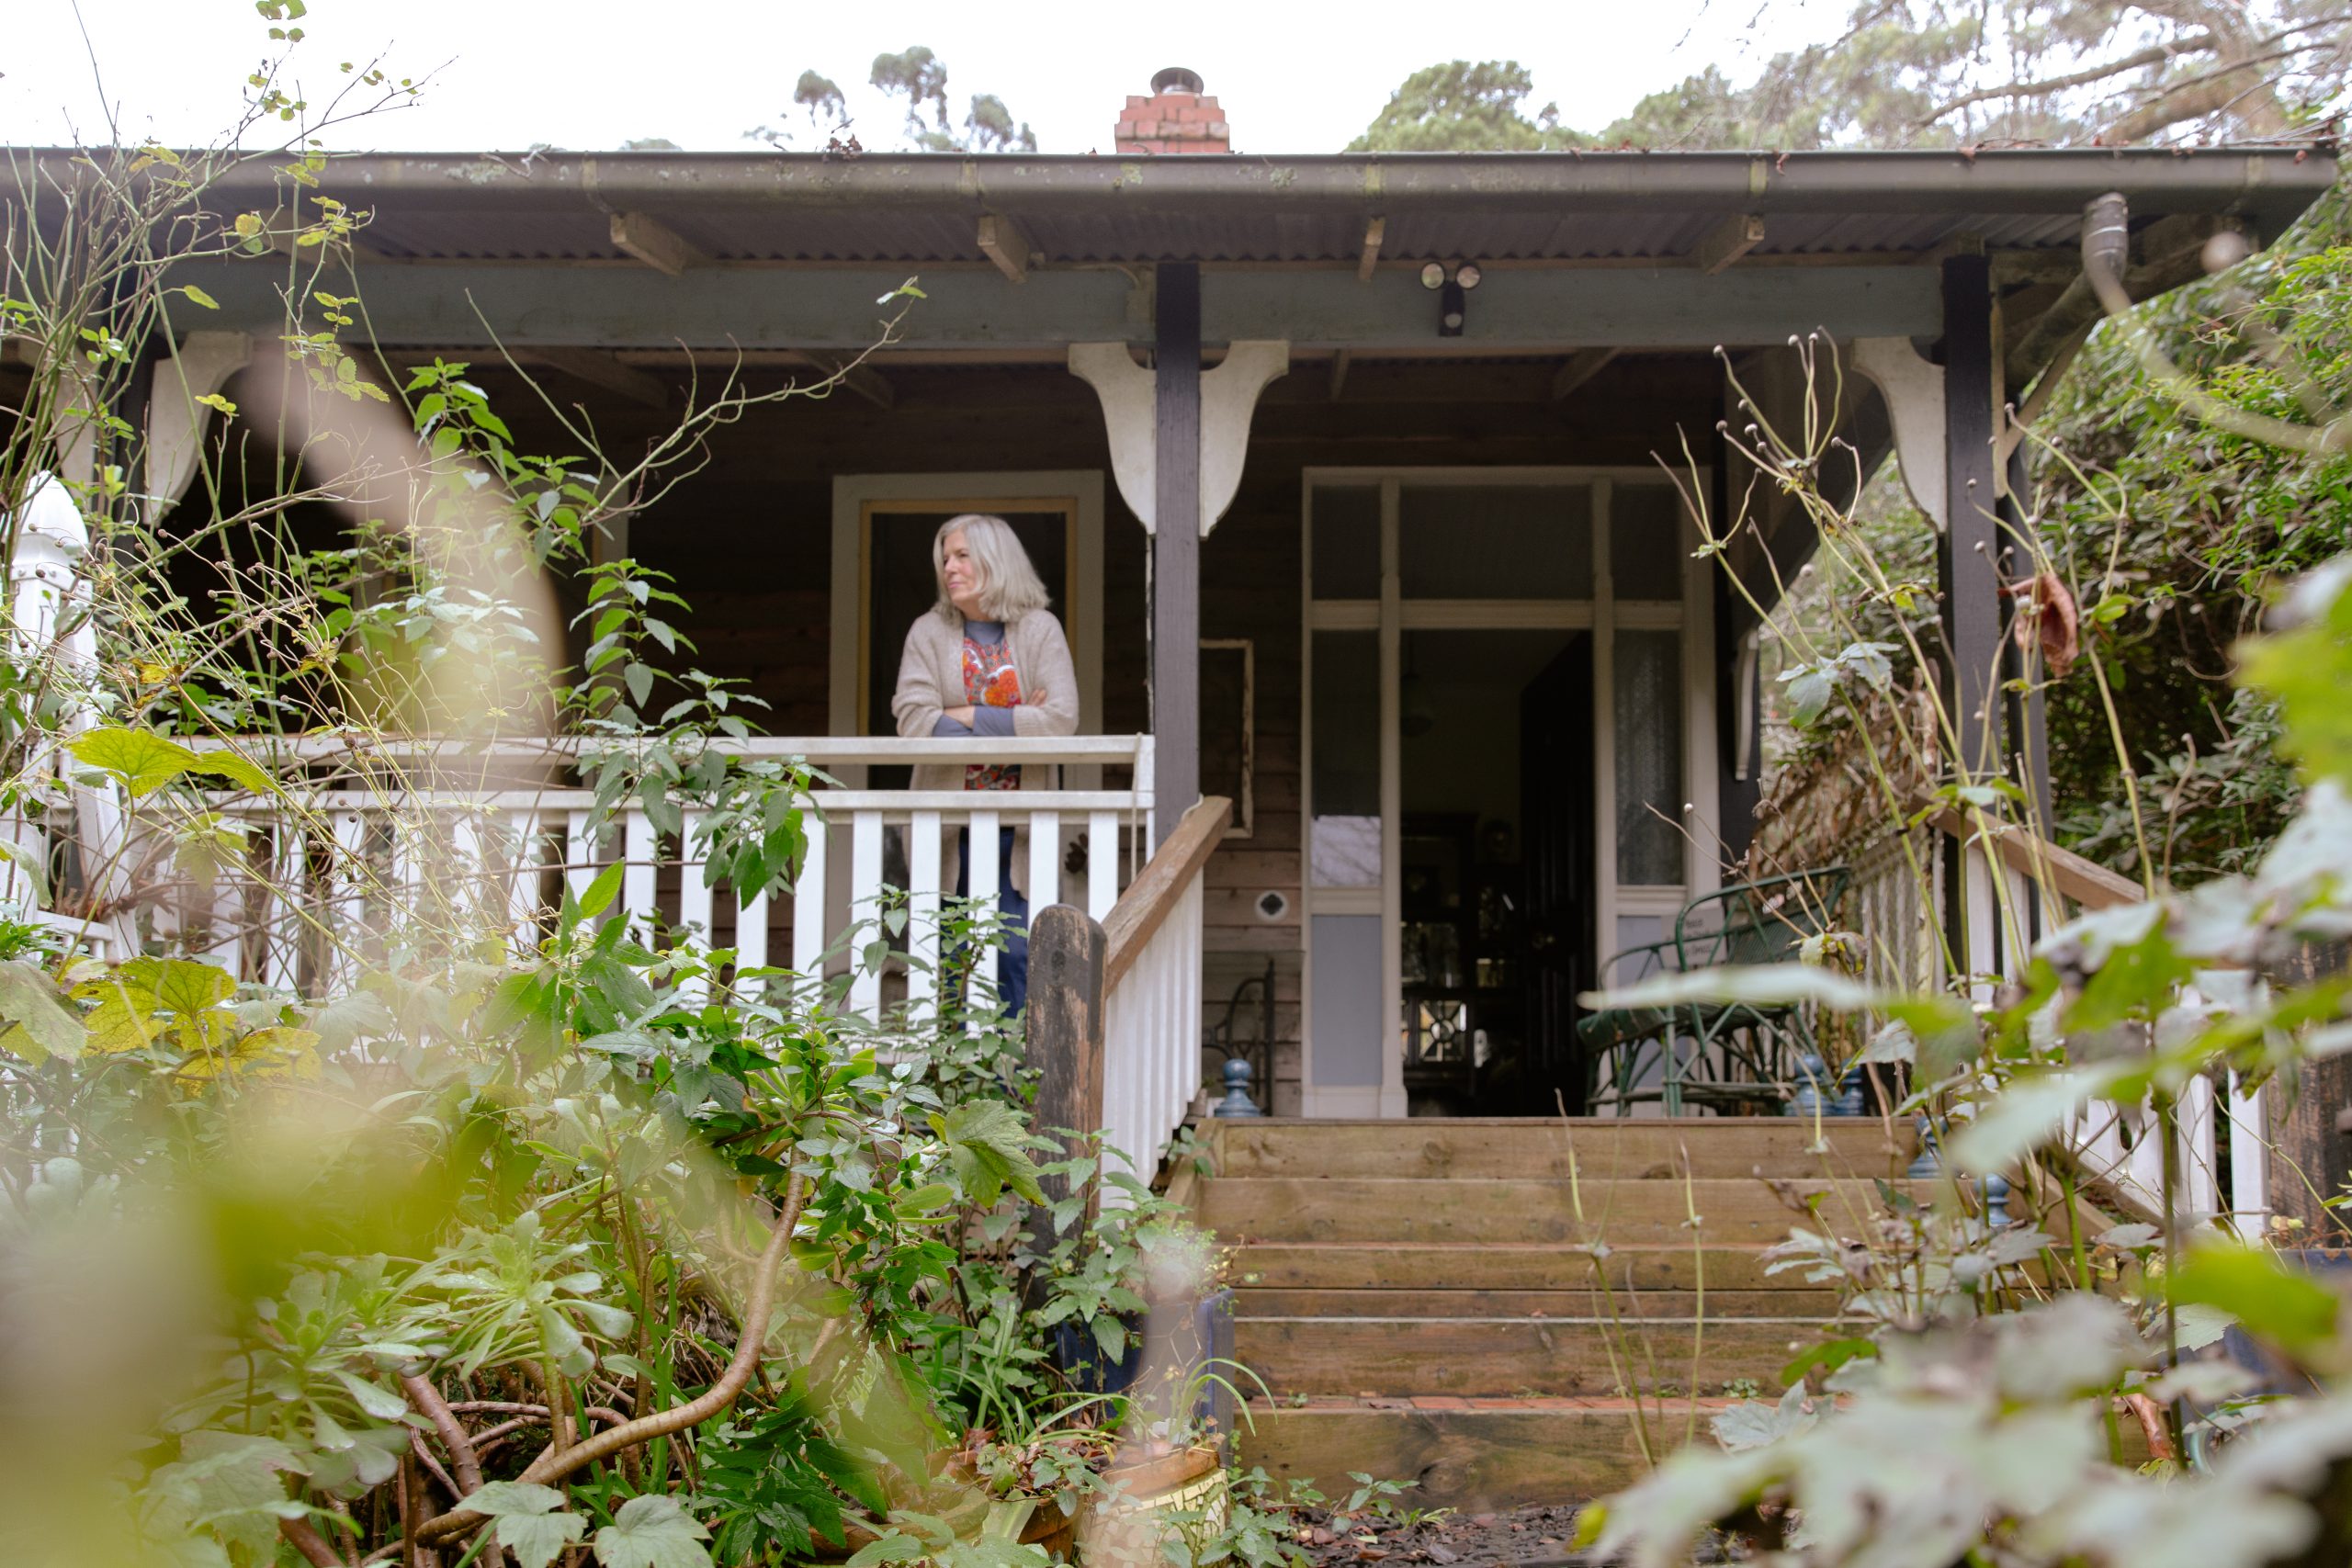 Alicia Cornwell standing on the porch of her Olinda home